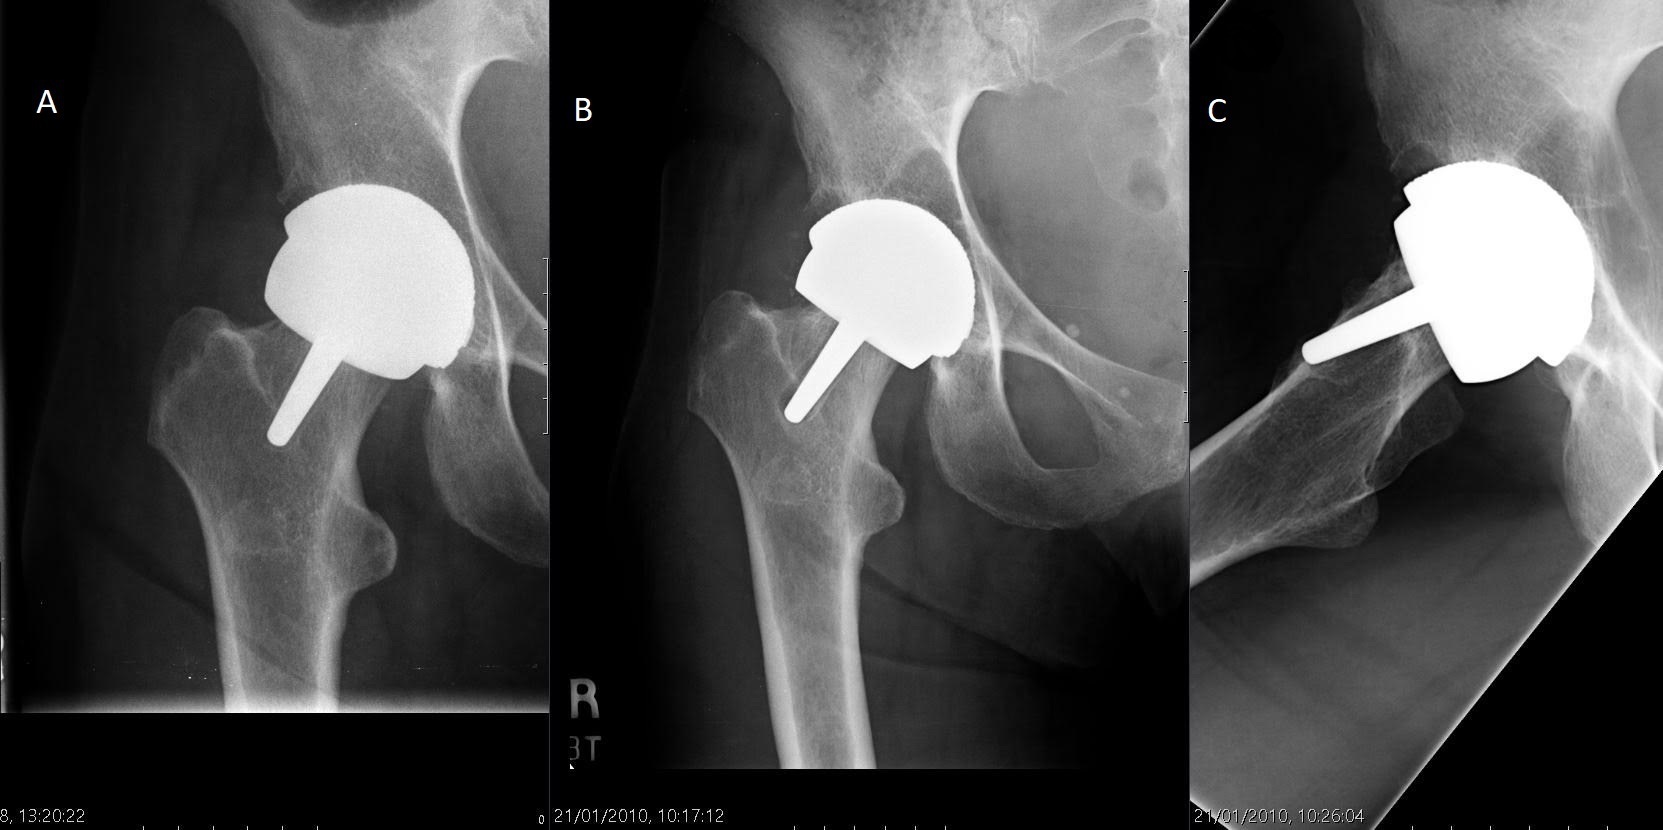 Fig. 5 
          Hip radiographs in a 56-year-old woman. From left to right: a) immediate postoperative view; b) two years following index surgery extensive lysis had formed behind the acetabular component and radiolucency was observed around the femoral peg; c) lateral view at two years showing resorption of bone beneath the femoral component causing loosening and migration of the femoral component. Revision was undertaken.
        